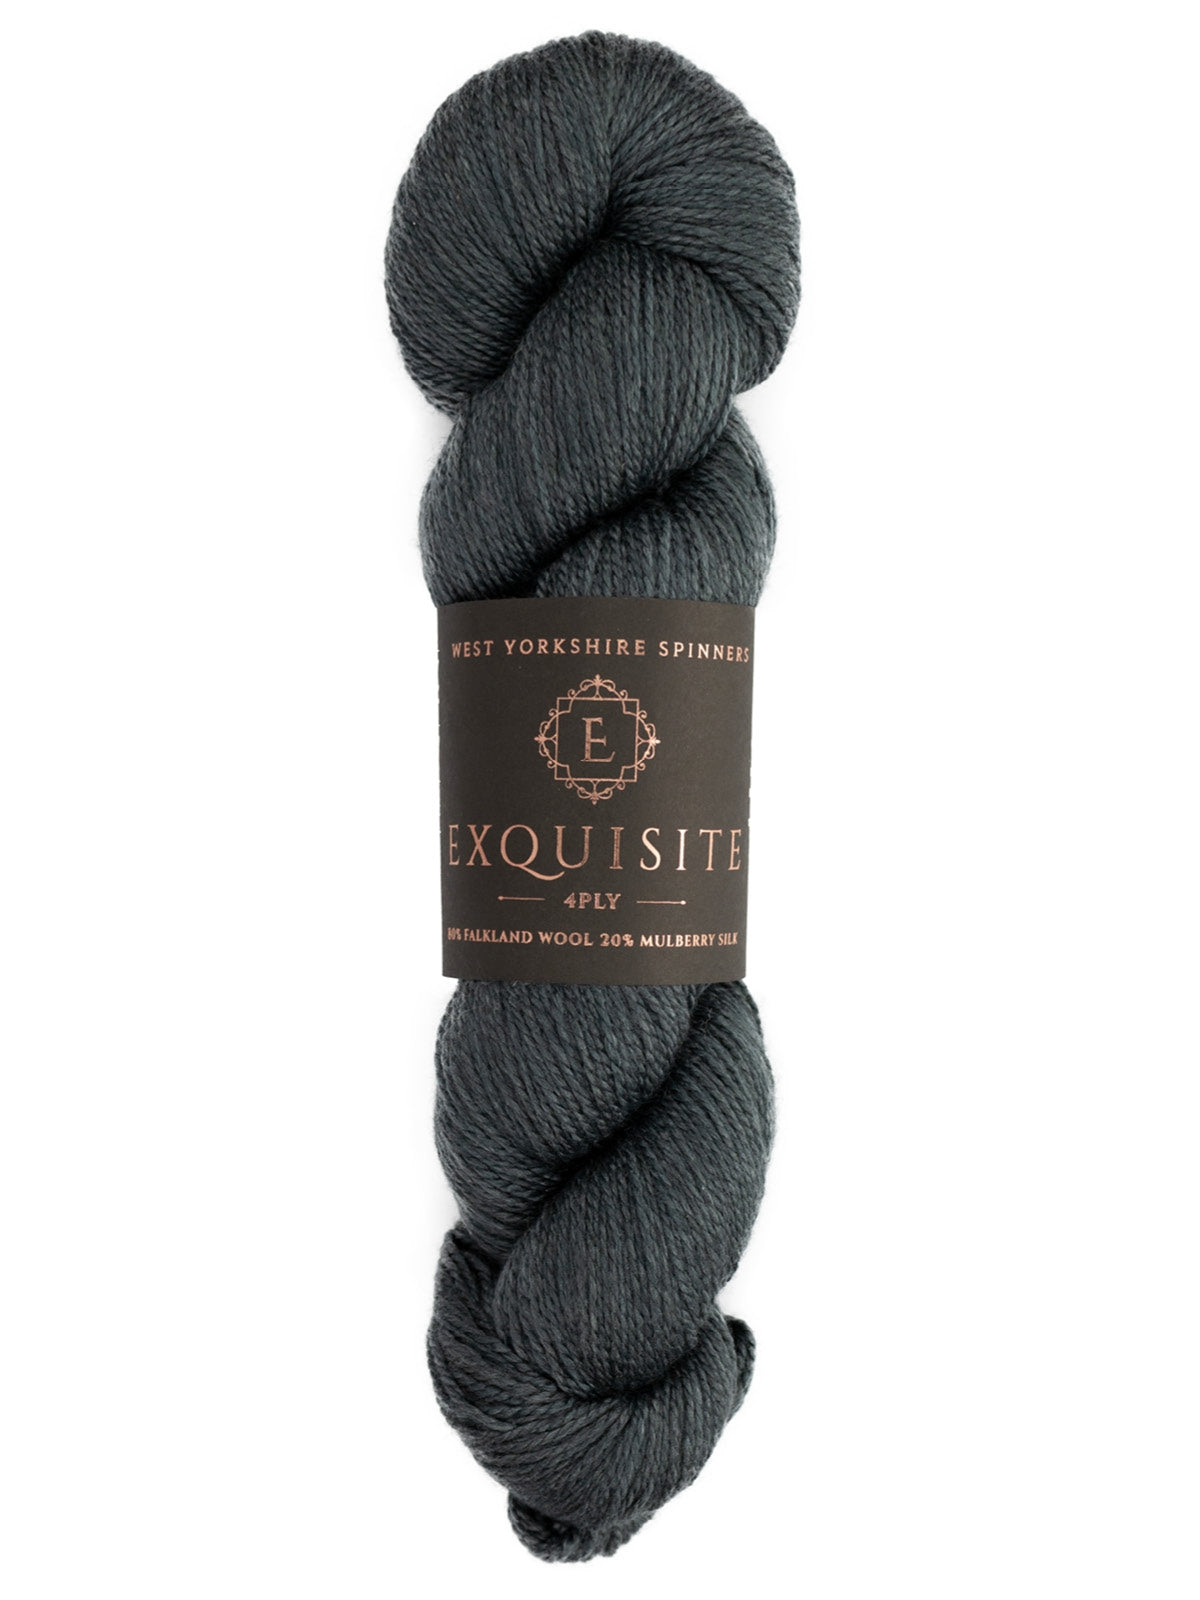 West Yorkshire Spinners Exquiste 4 ply Fingering yarn color dark gray